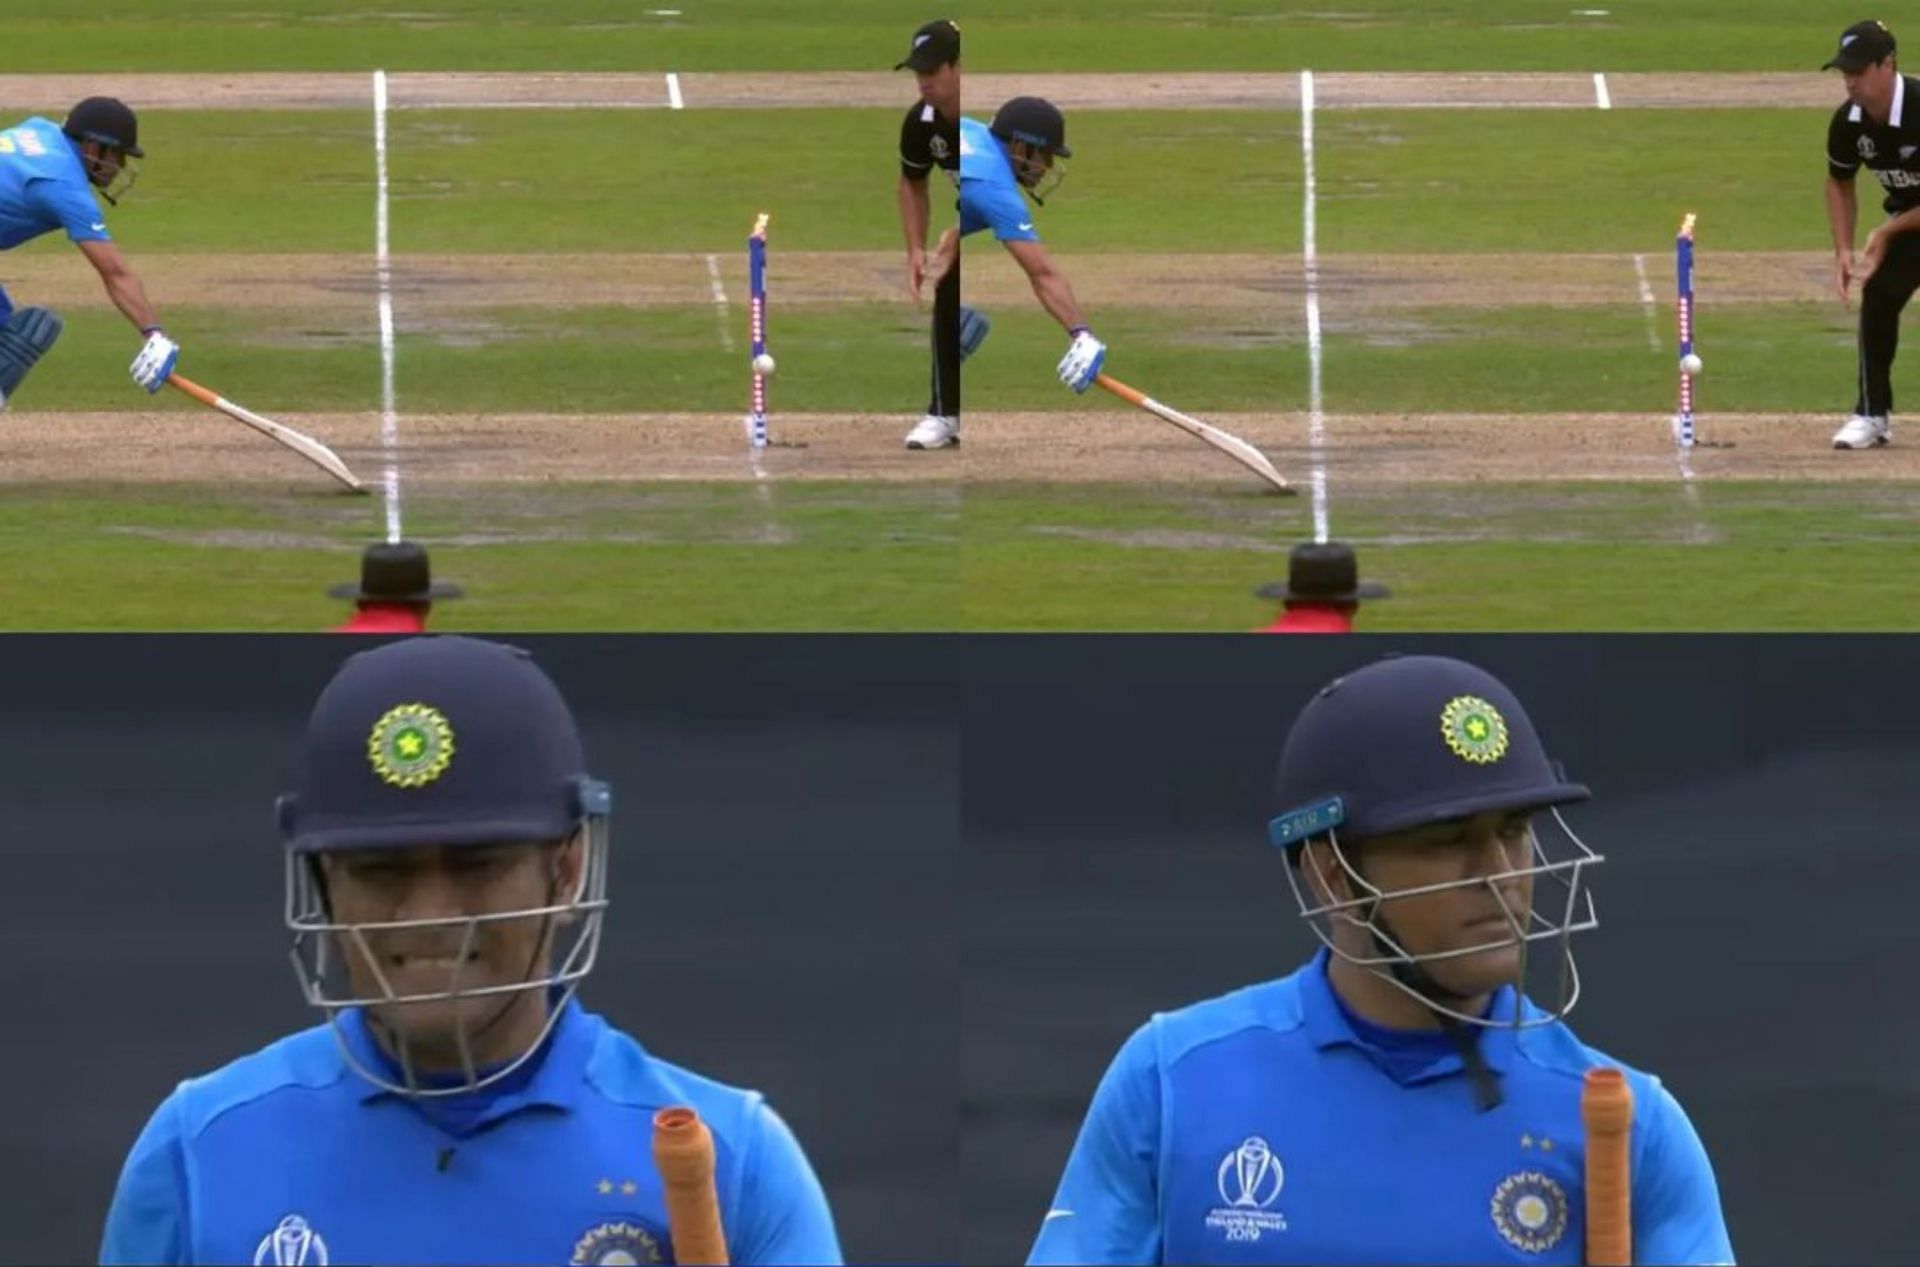 MS Dhoni&#039;s final international cricket appearance came in 2019 in Manchester. (Credit: Twitter)